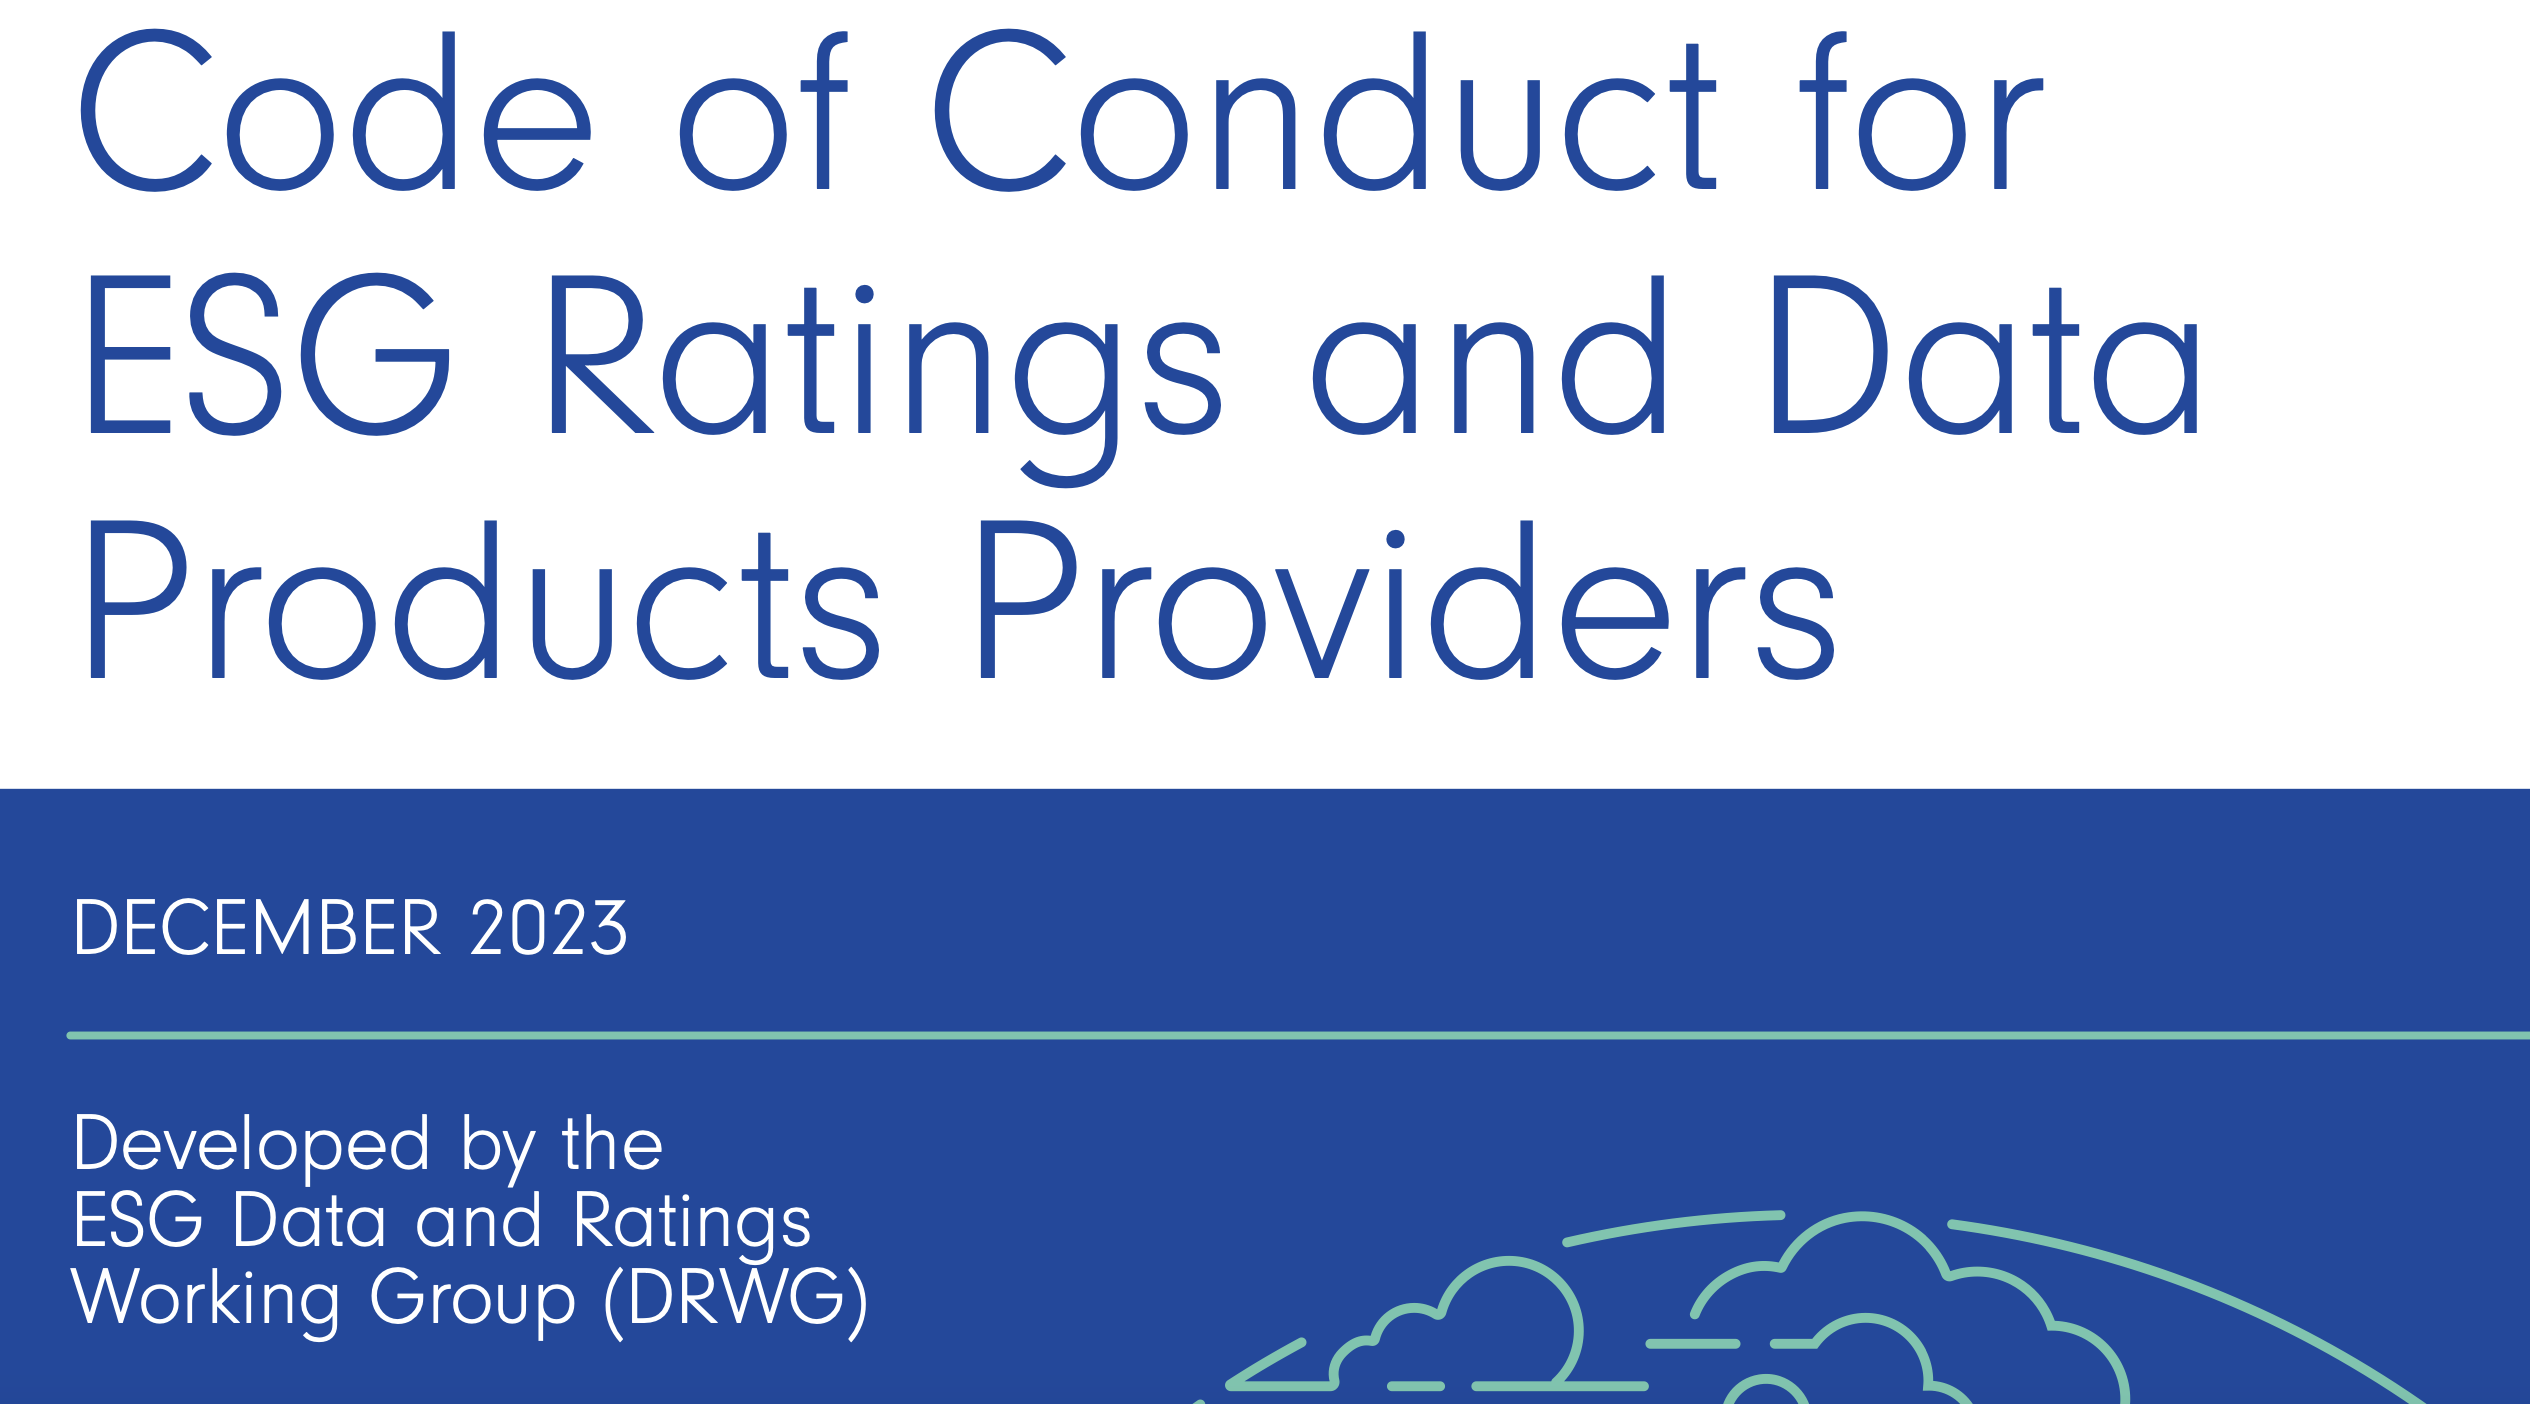 sustainAX - ICMA Code of Conduct for ESG Rating and Data Providers 2023